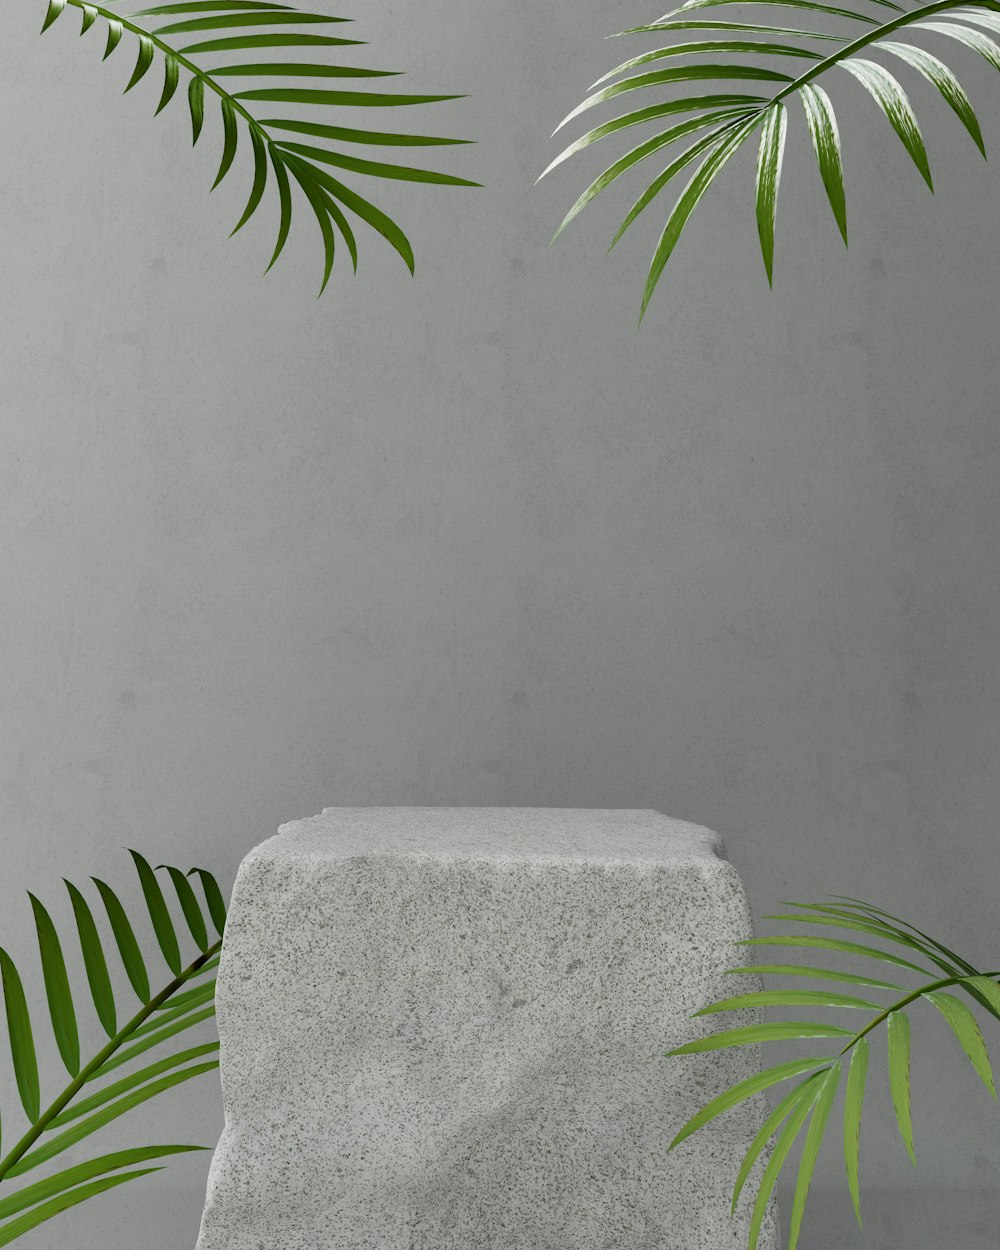 a concrete block with a green plant on top of it